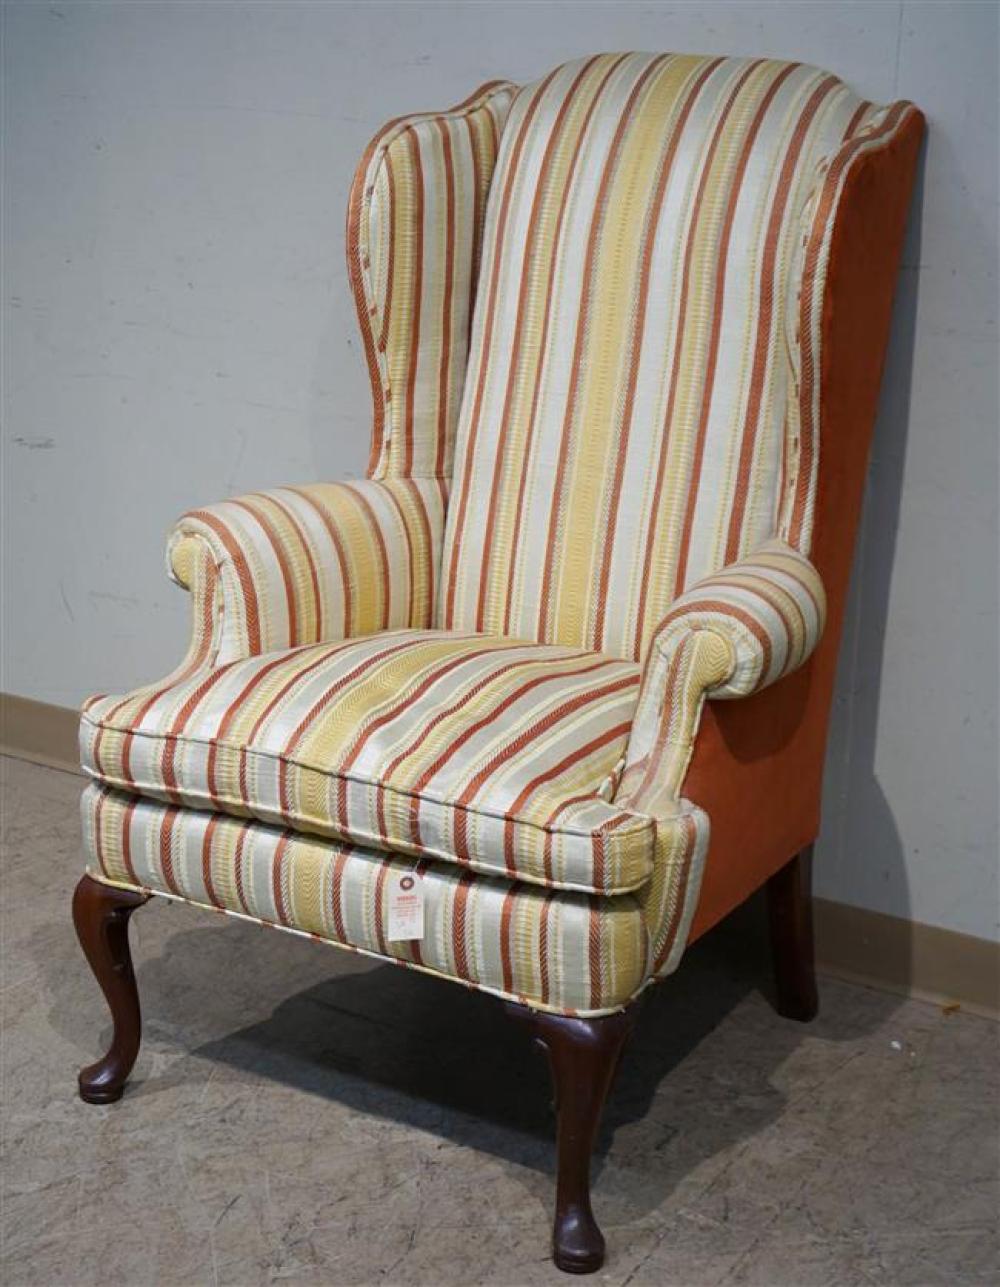 QUEEN ANNE STYLE STRIPED UPHOLSTERED 321f5c